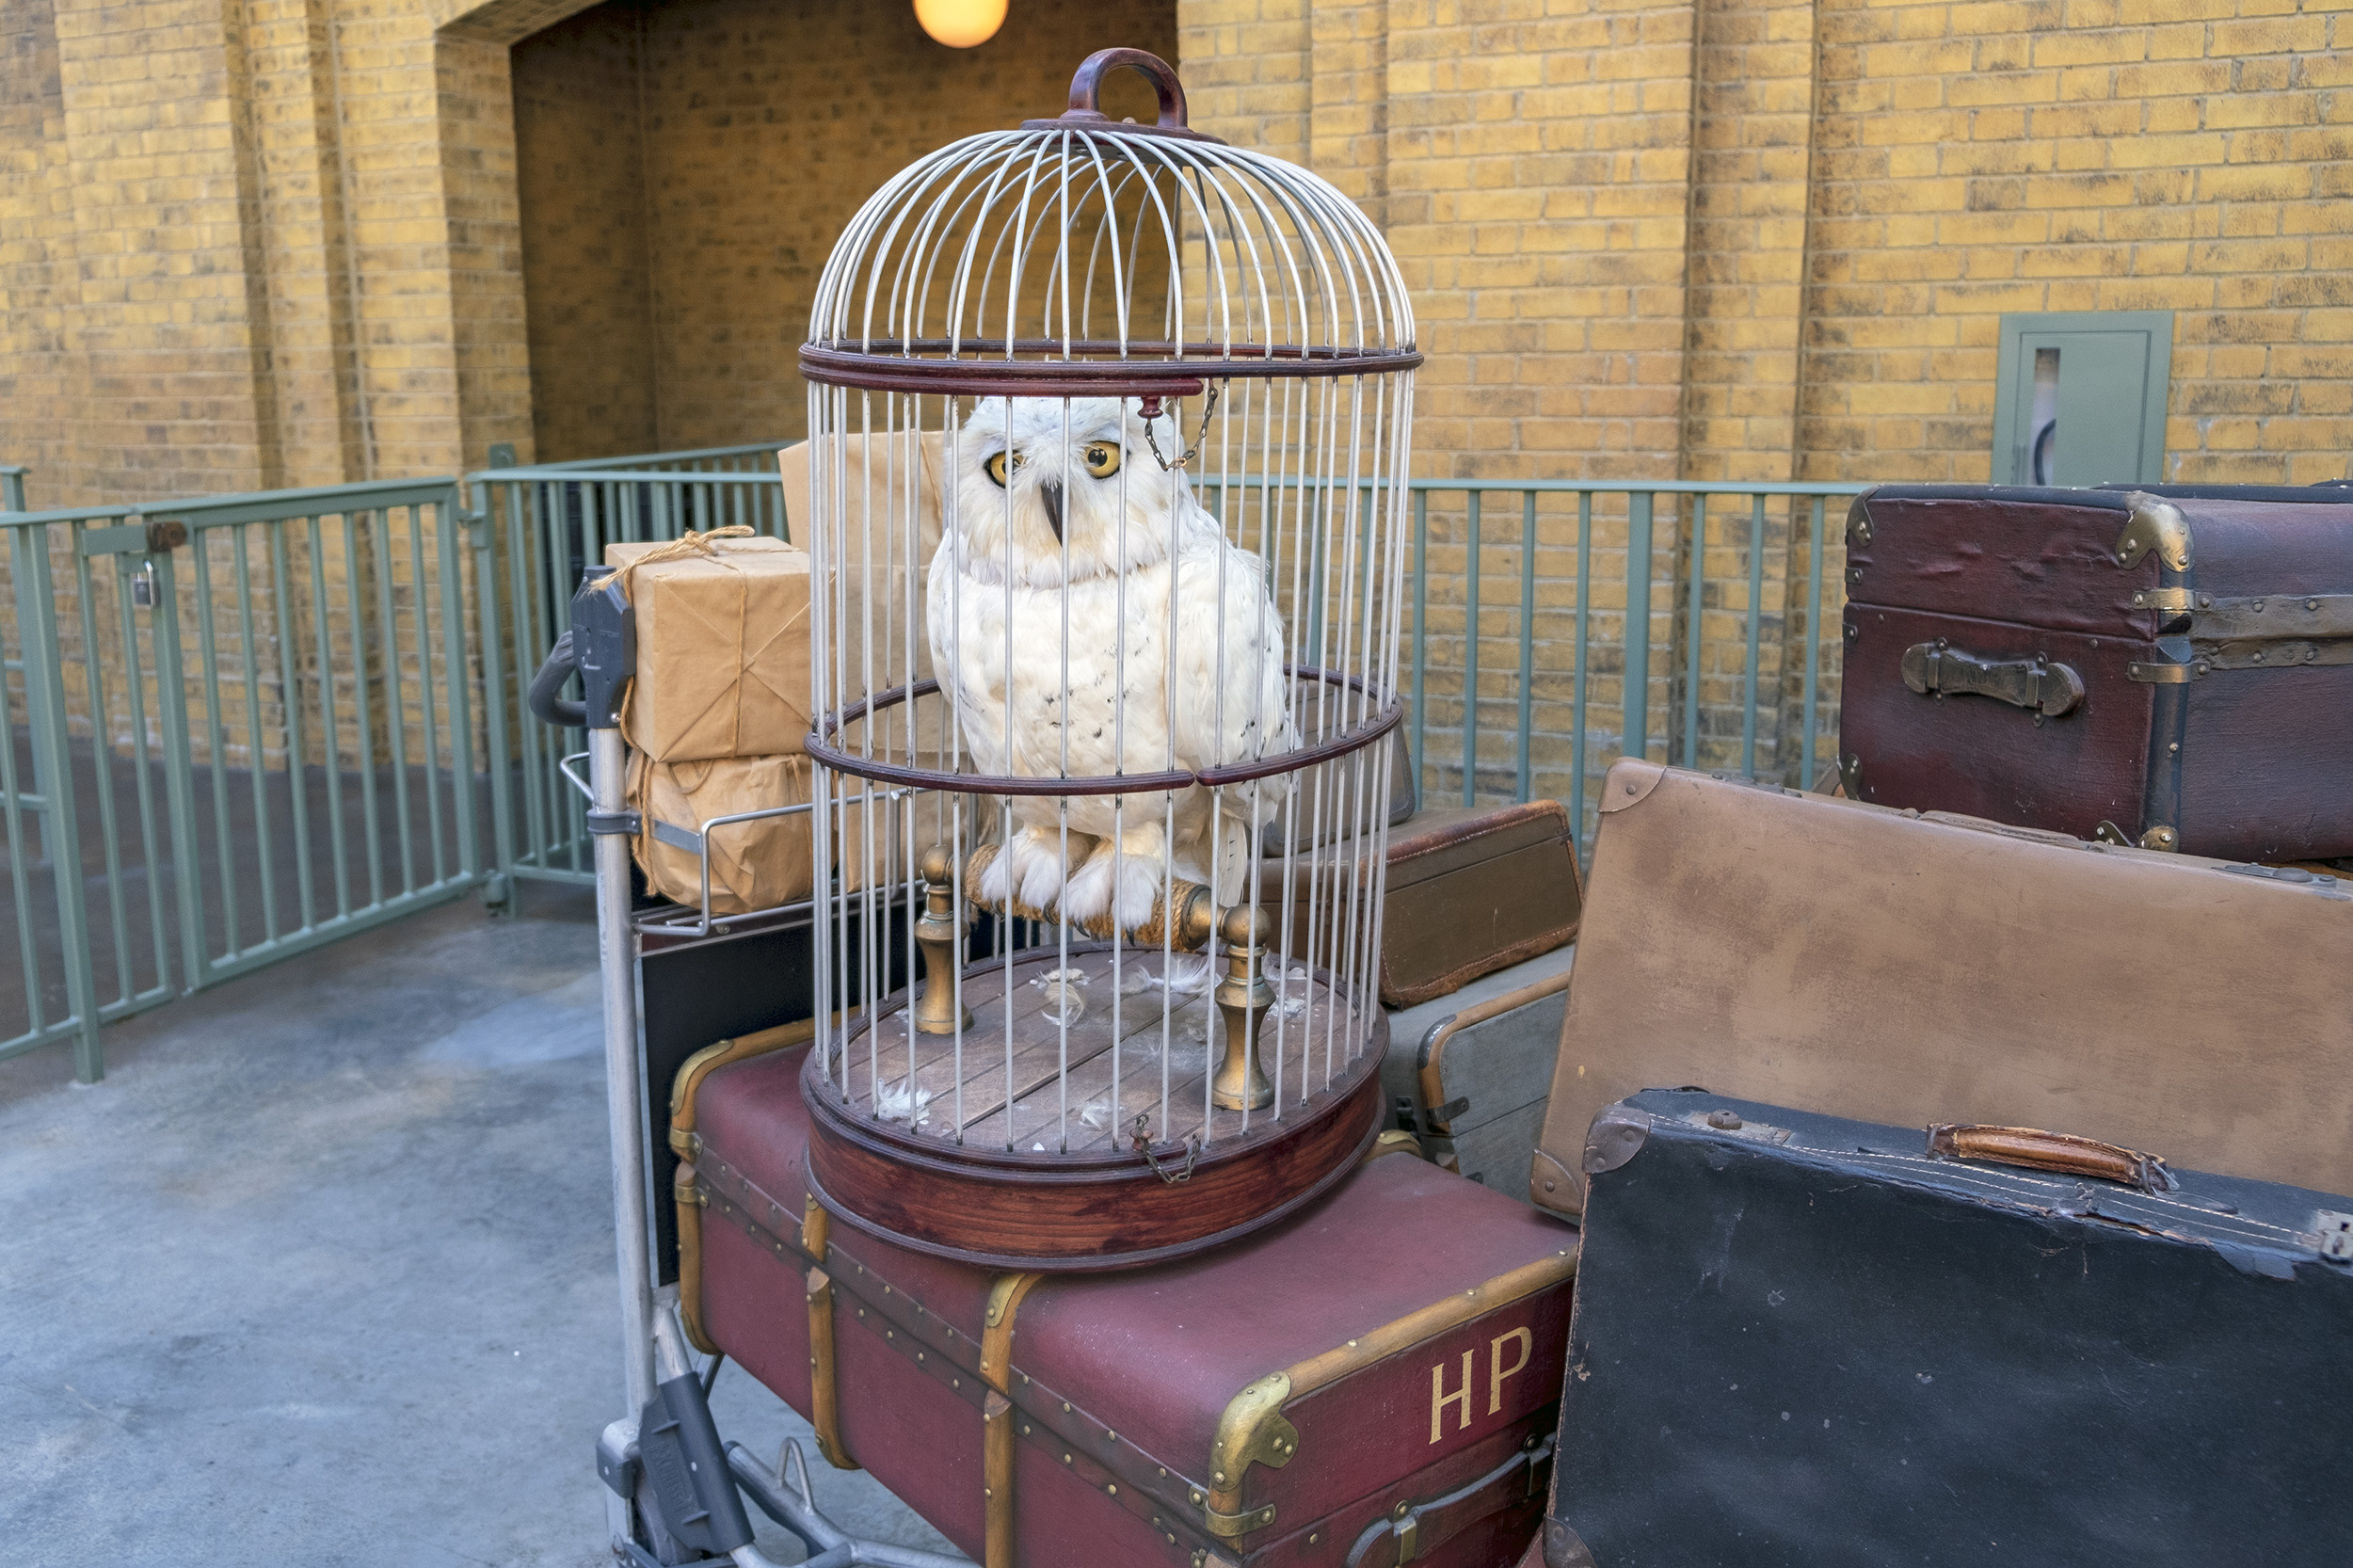 Harry Potters uggla Hedwig. The Wizarding World of Harry Potter